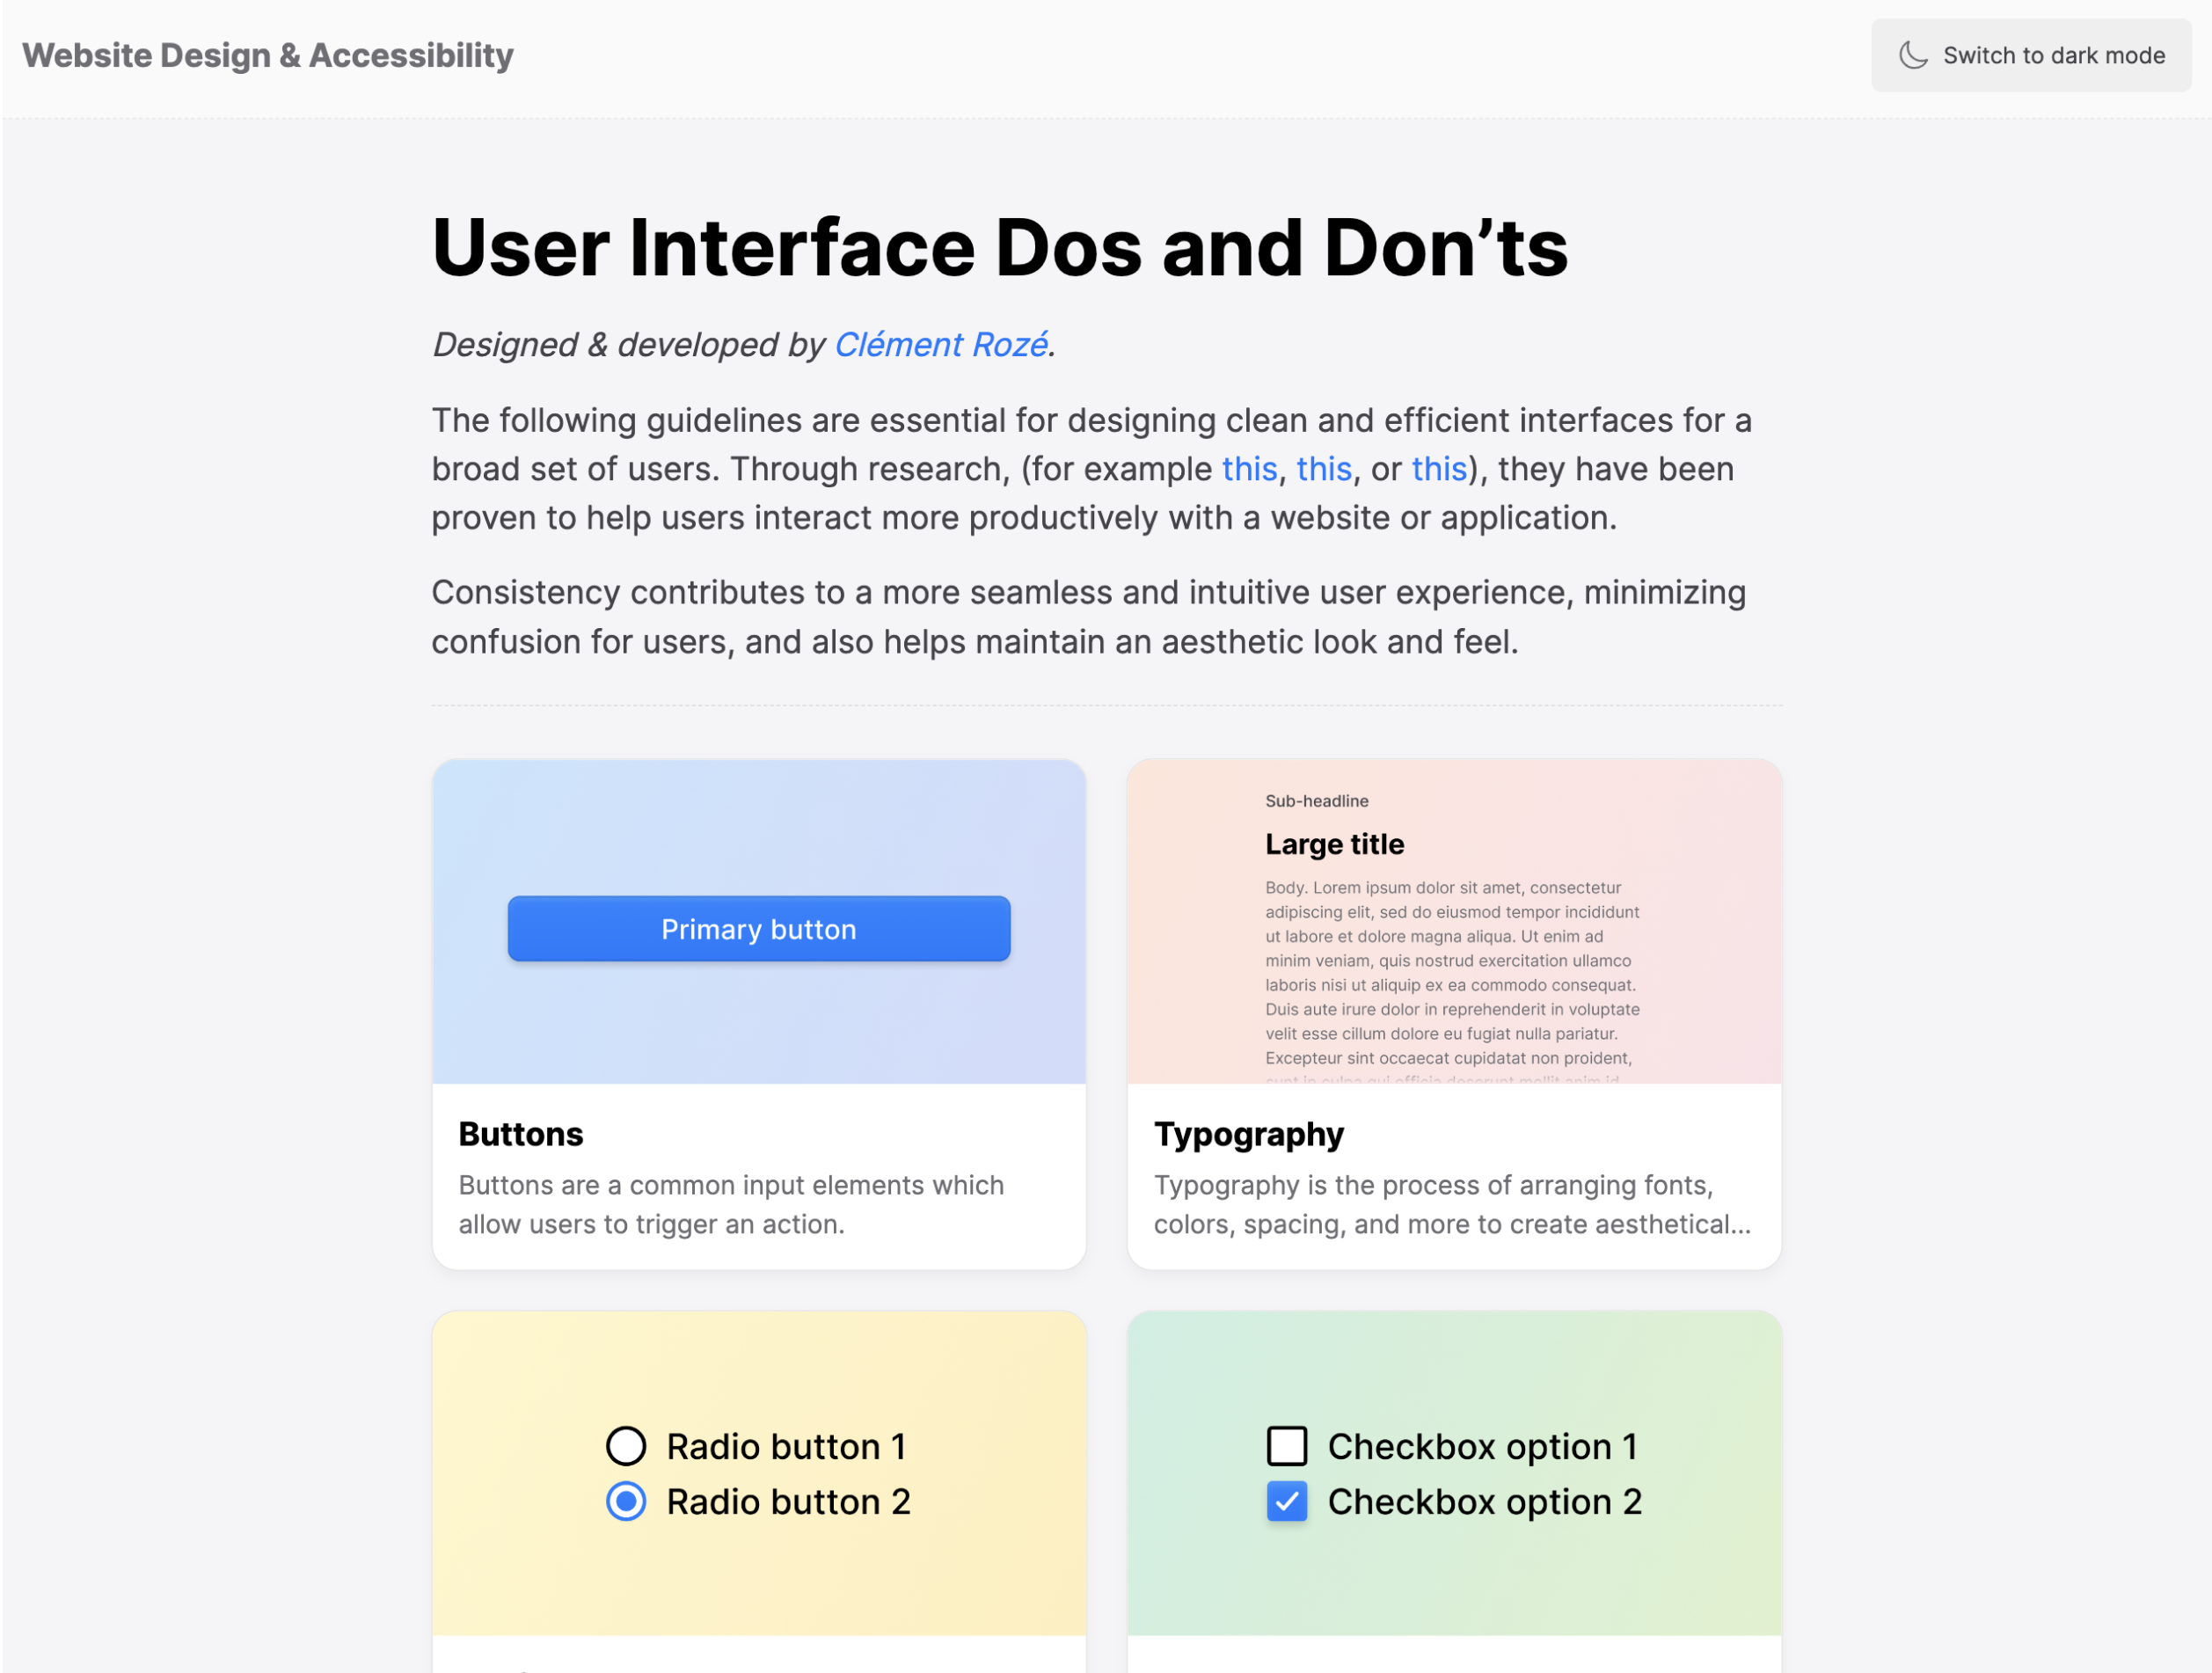 home page of UI Dos and Don'ts website showing several UI categories for guidelines